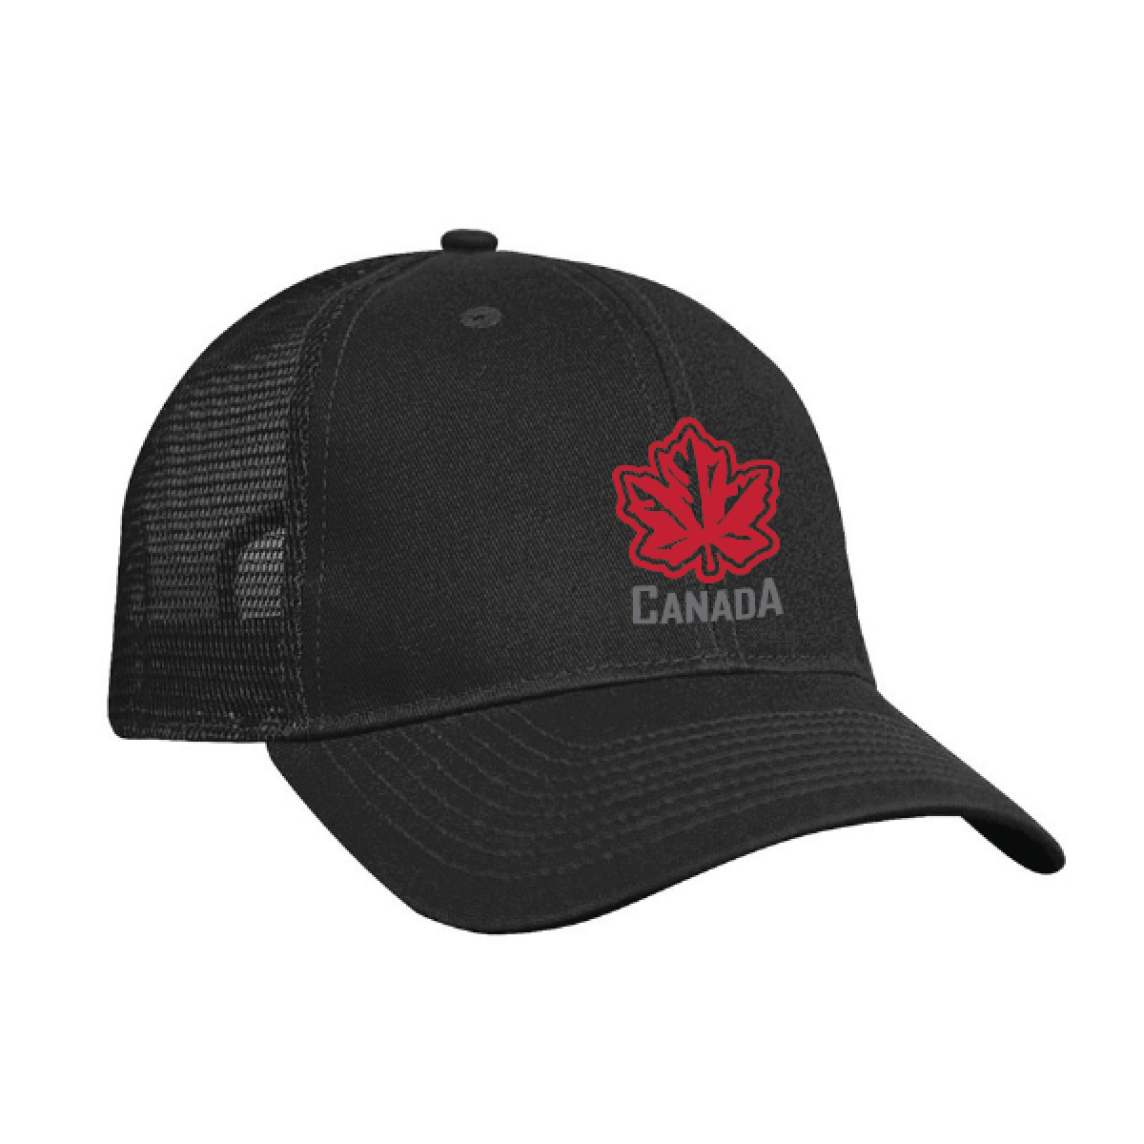 OCG Maple Leaf embroidered on Truckers Mesh Back Cap